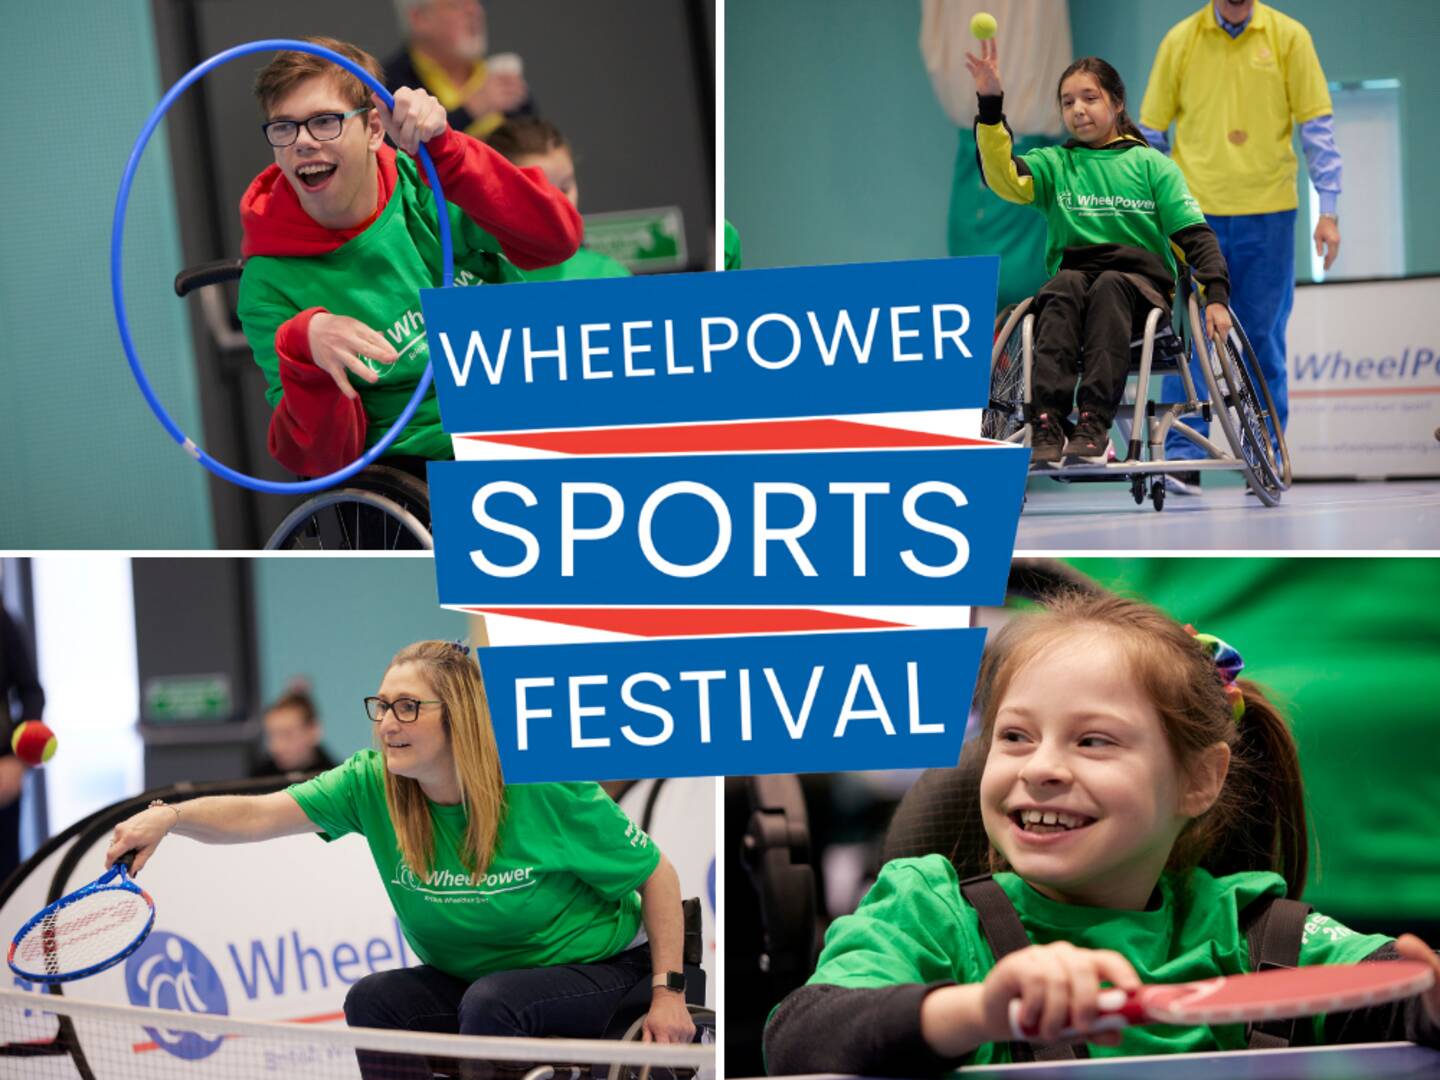 Four disabled people taking part in WheelPower's Sports Festival